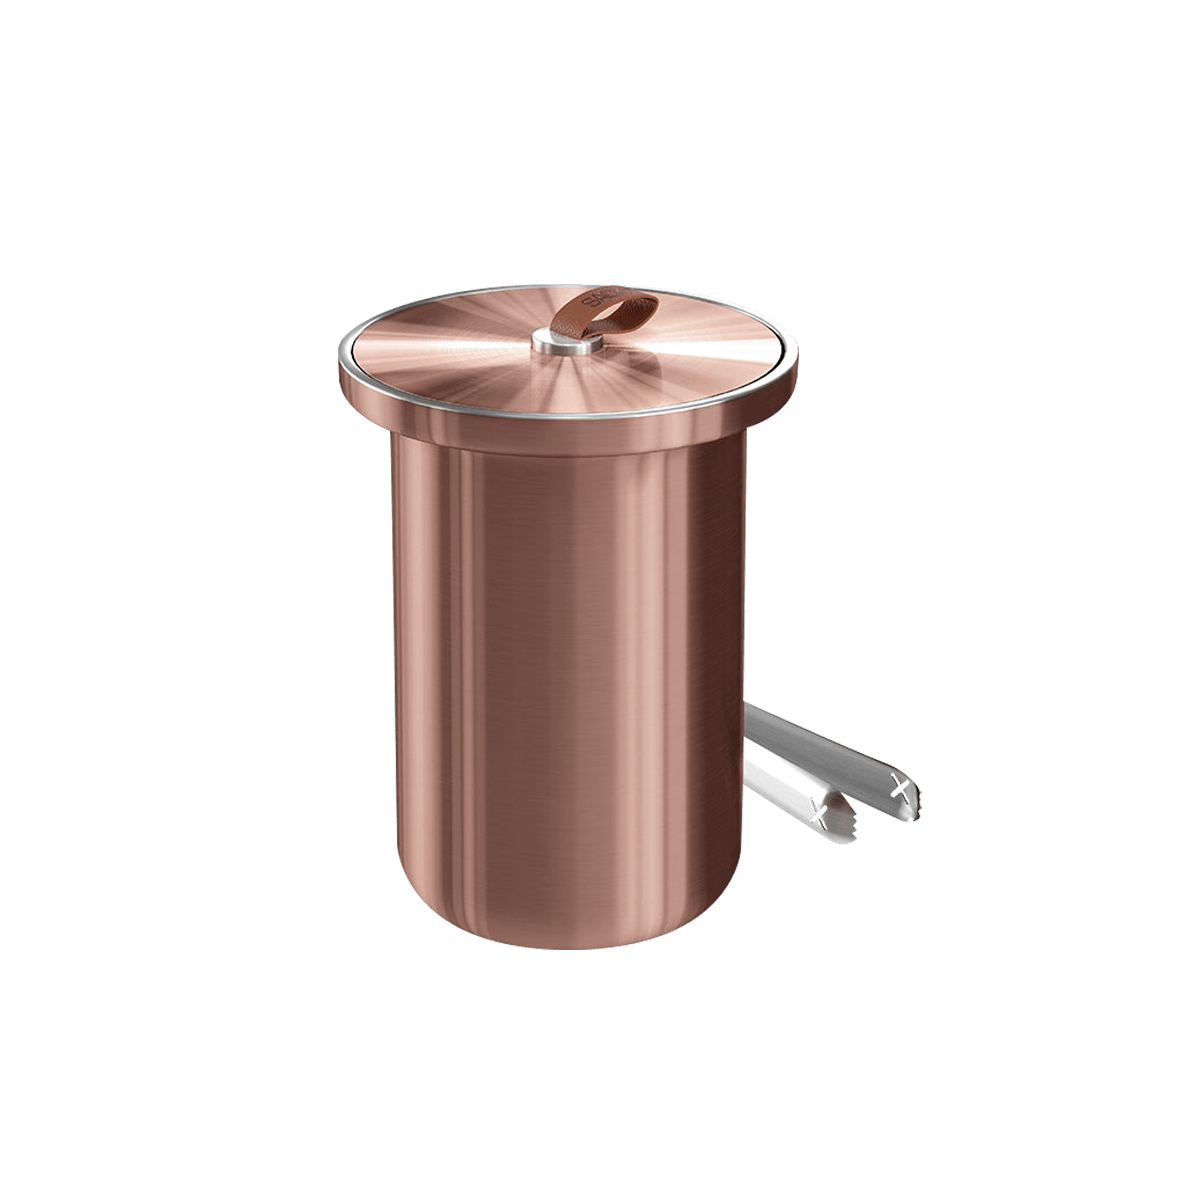 variant_8583601% | Wine Cooler - Ø14 [Contract] - Copper | SACKit